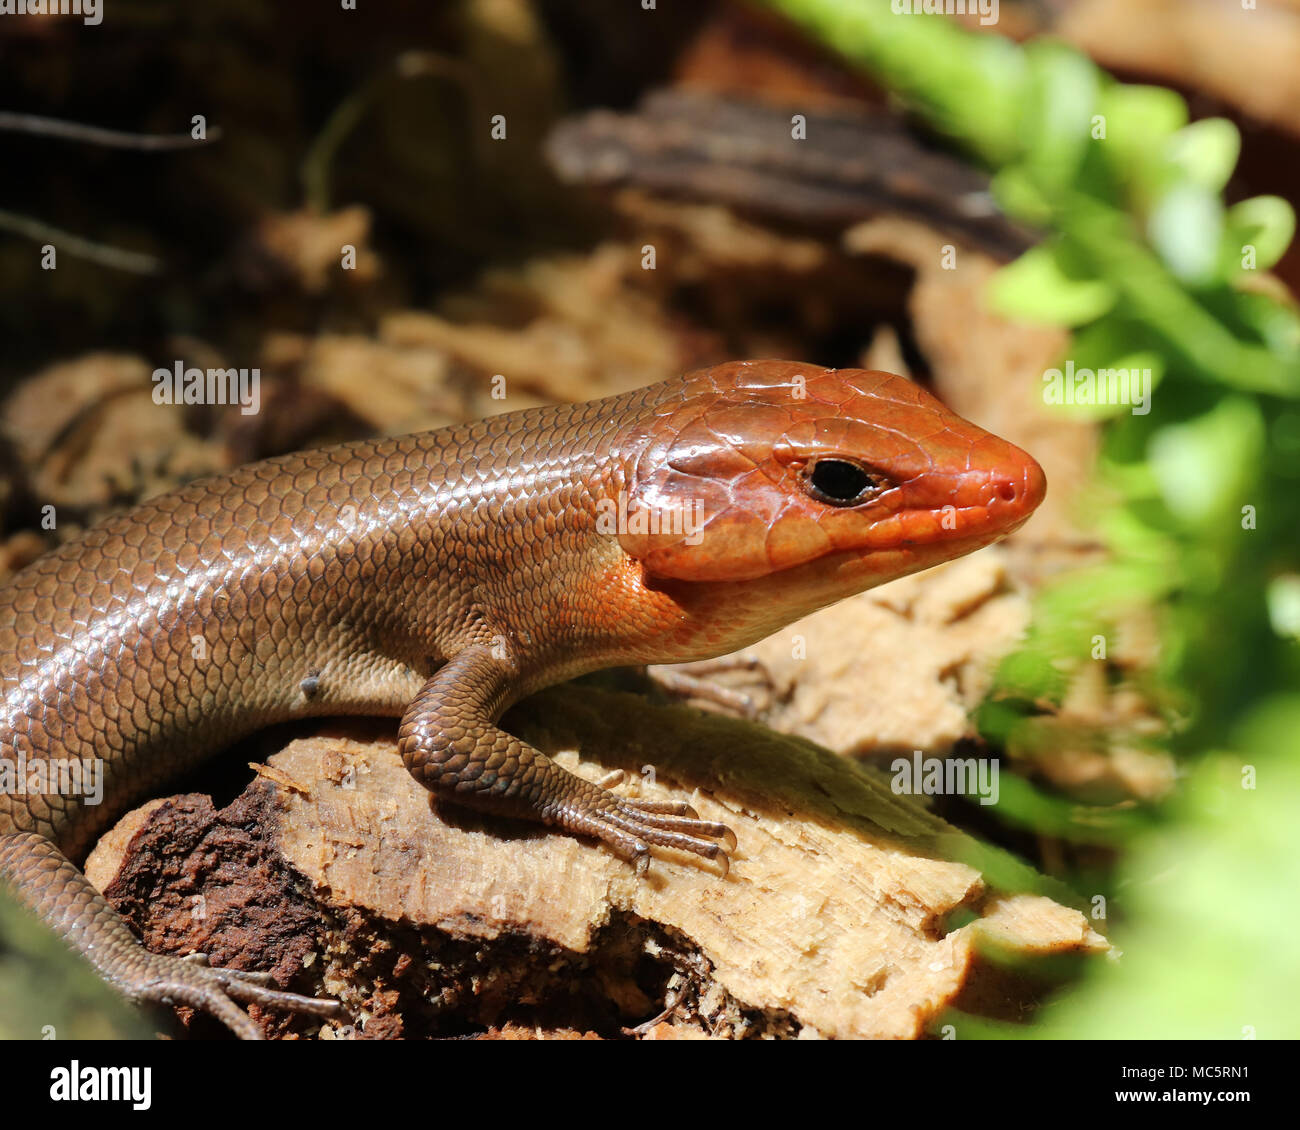 This male Broad-headed skink will attract many females since they prefer the male with the brightest orange coloring and widest jaw which this one has Stock Photo